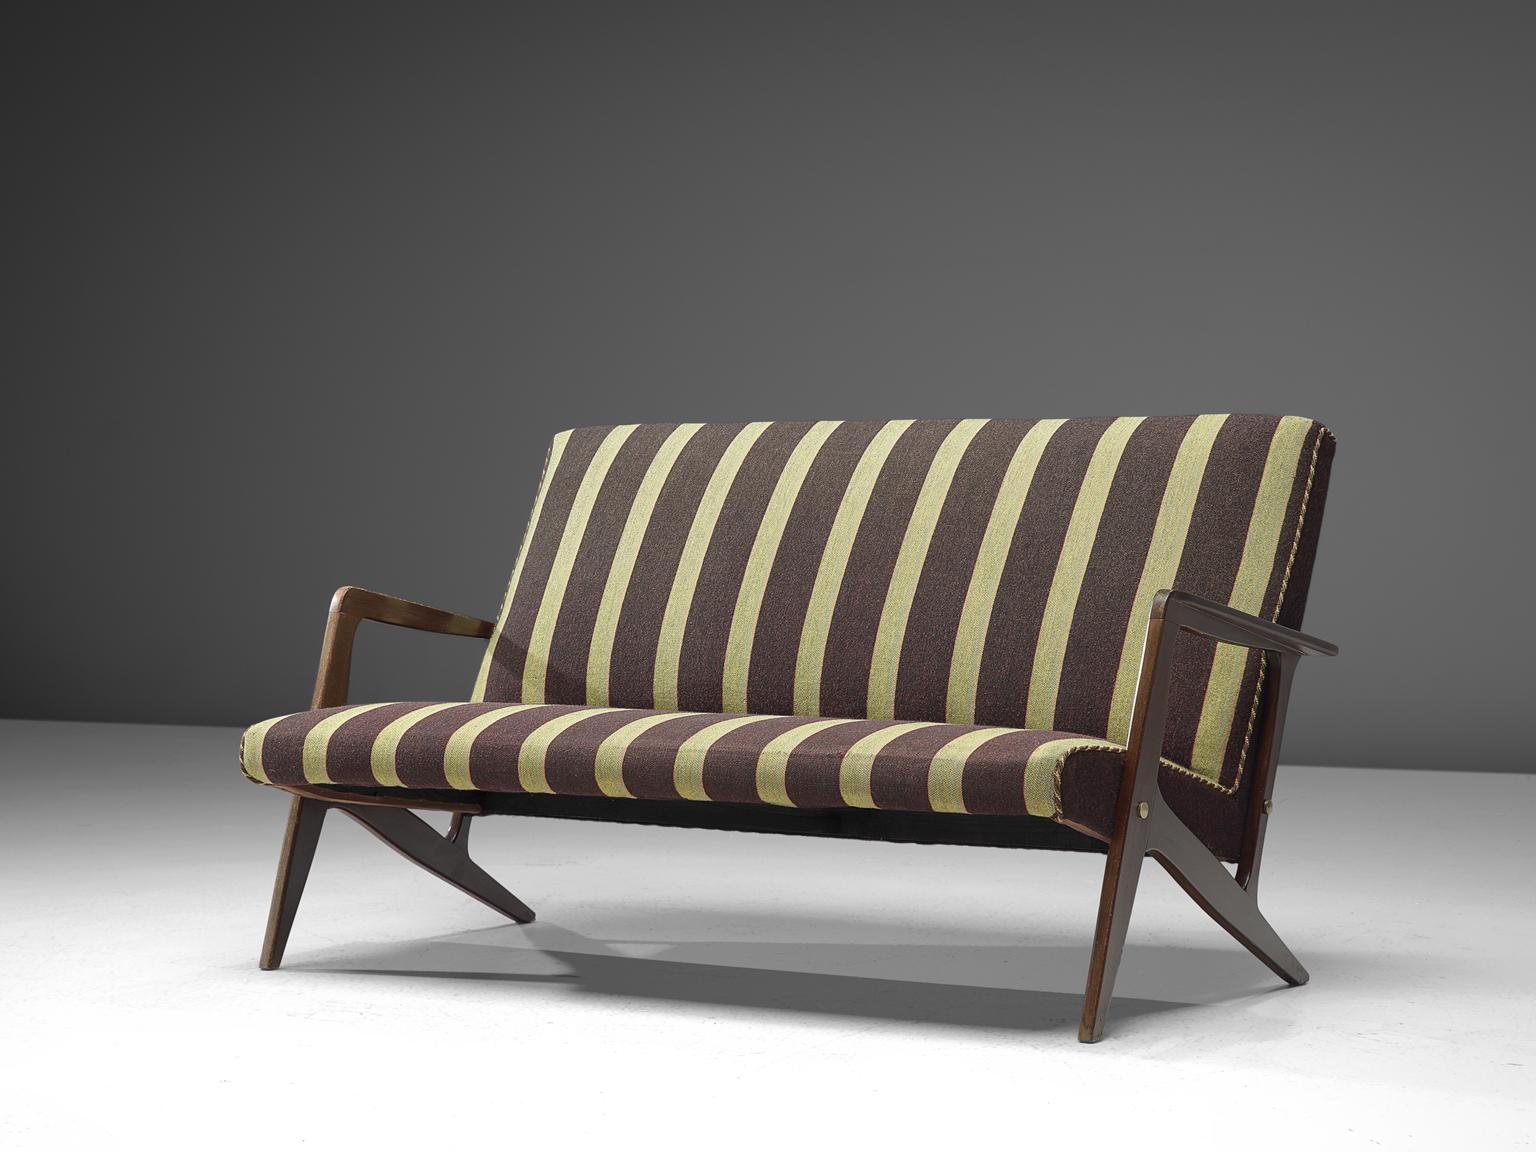 Sofa, stained wood and green fabric, Scandinavia, 1950s. 

Small reclining sofa with organic shaped wooden base. The eye catching element is the wooden, almost branch-like frame. This organic shaped frame splits into two legs at the end of the